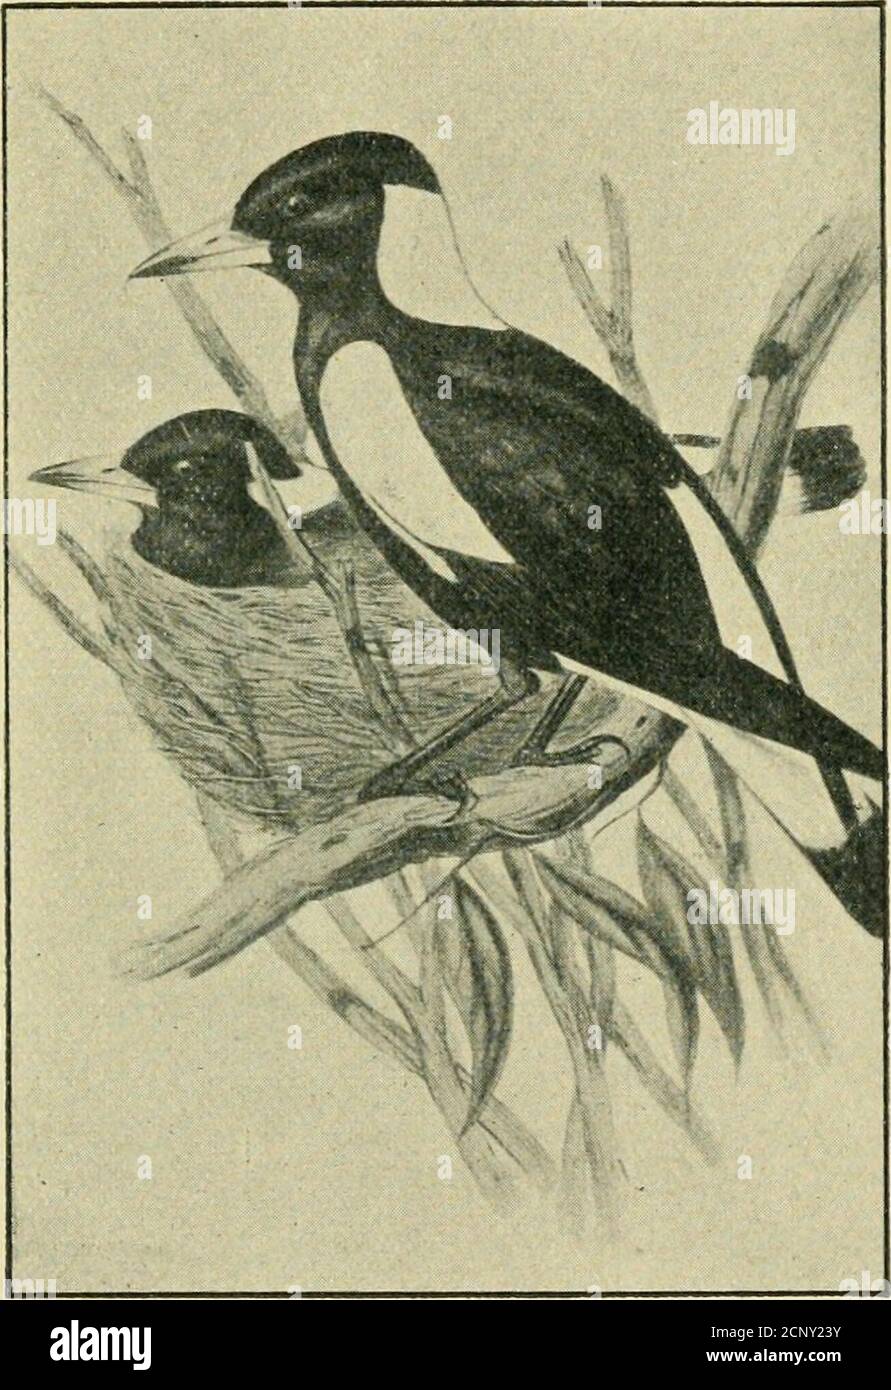 . A key to the birds of Australia : with their geographical distribution . Species 239.—White-faced Titmouse (^ nat. size).. Species (? Variety) 21:3.—Magpie (i nat. size). Genus—PACHYCEPHALA : paclius, thick; kephale, head. 264. melanura : melas, melanos, black ; oura, tail. 265. gutturalis : guttiir. throat. 266. occidentalis : occidentalis, western. 267. peninsulae : peninsula, peninsula. 268. glaucura : glaukos, grey ; oura. tail. 269. falcata : falcatus, sickle-shaped. 270. pal lida : pallidus, pale. Stock Photo